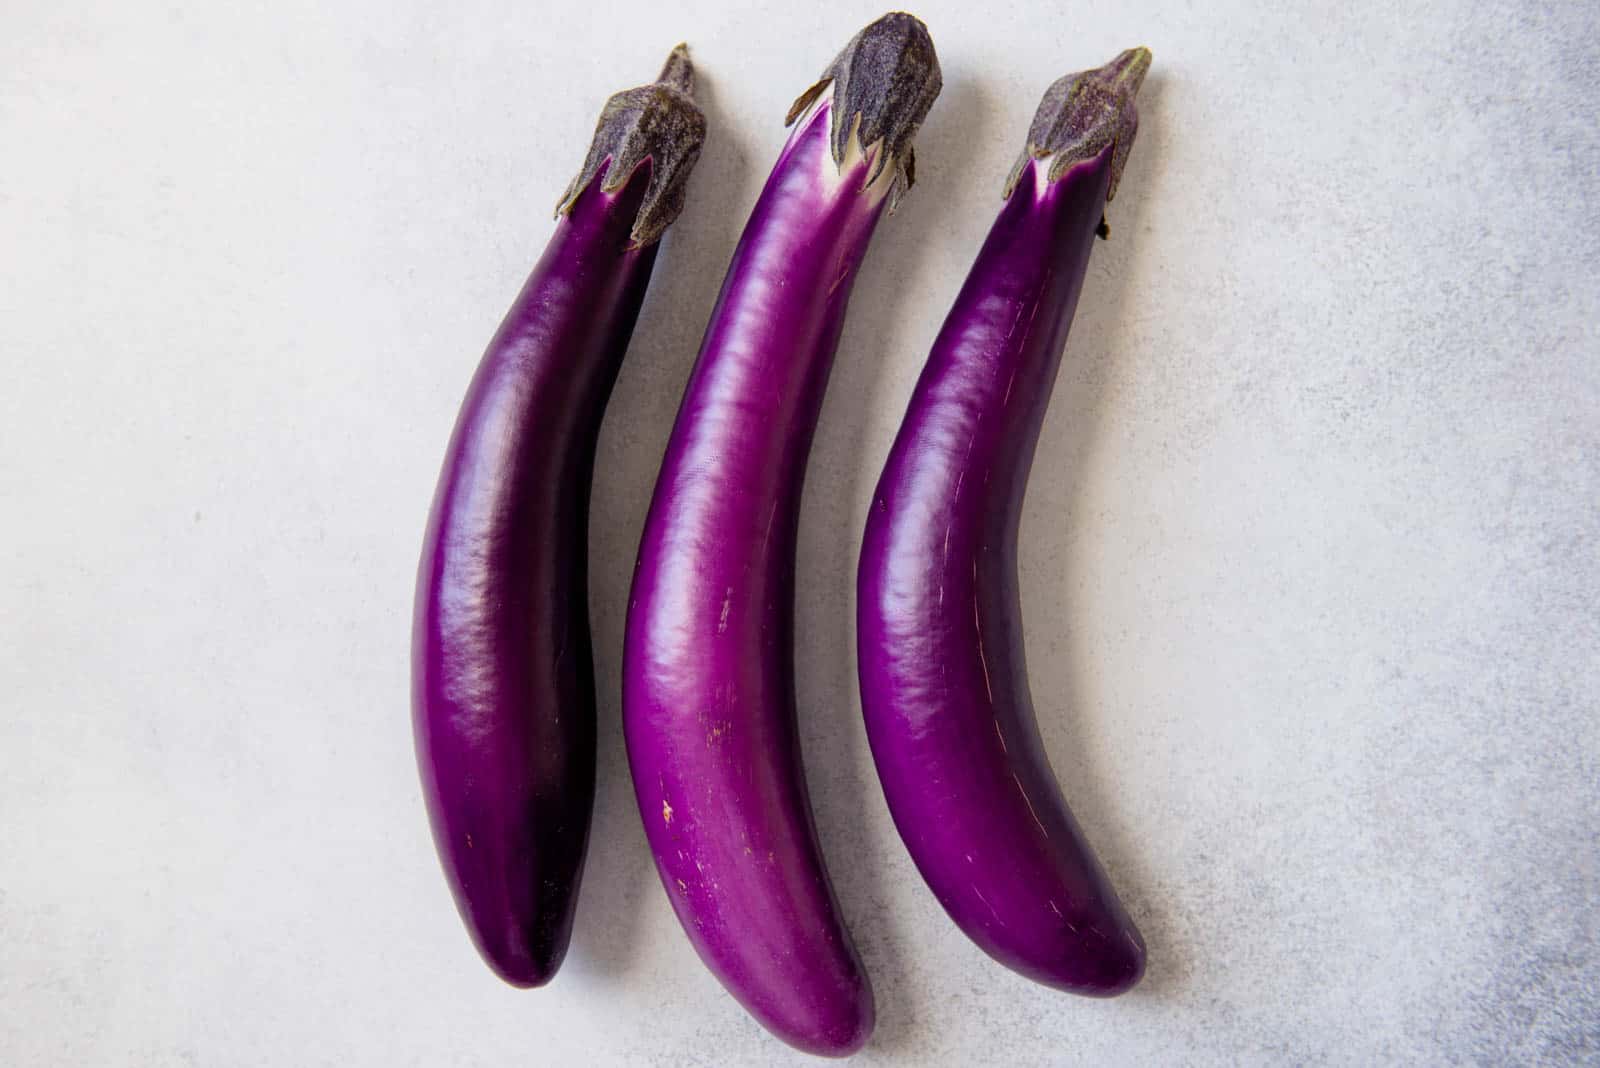 Photo of Chinese eggplant July Produce Guide | Healthy Nibbles by Lisa Lin July Produce Guide | Healthy Nibbles by Lisa Lin Eggplant